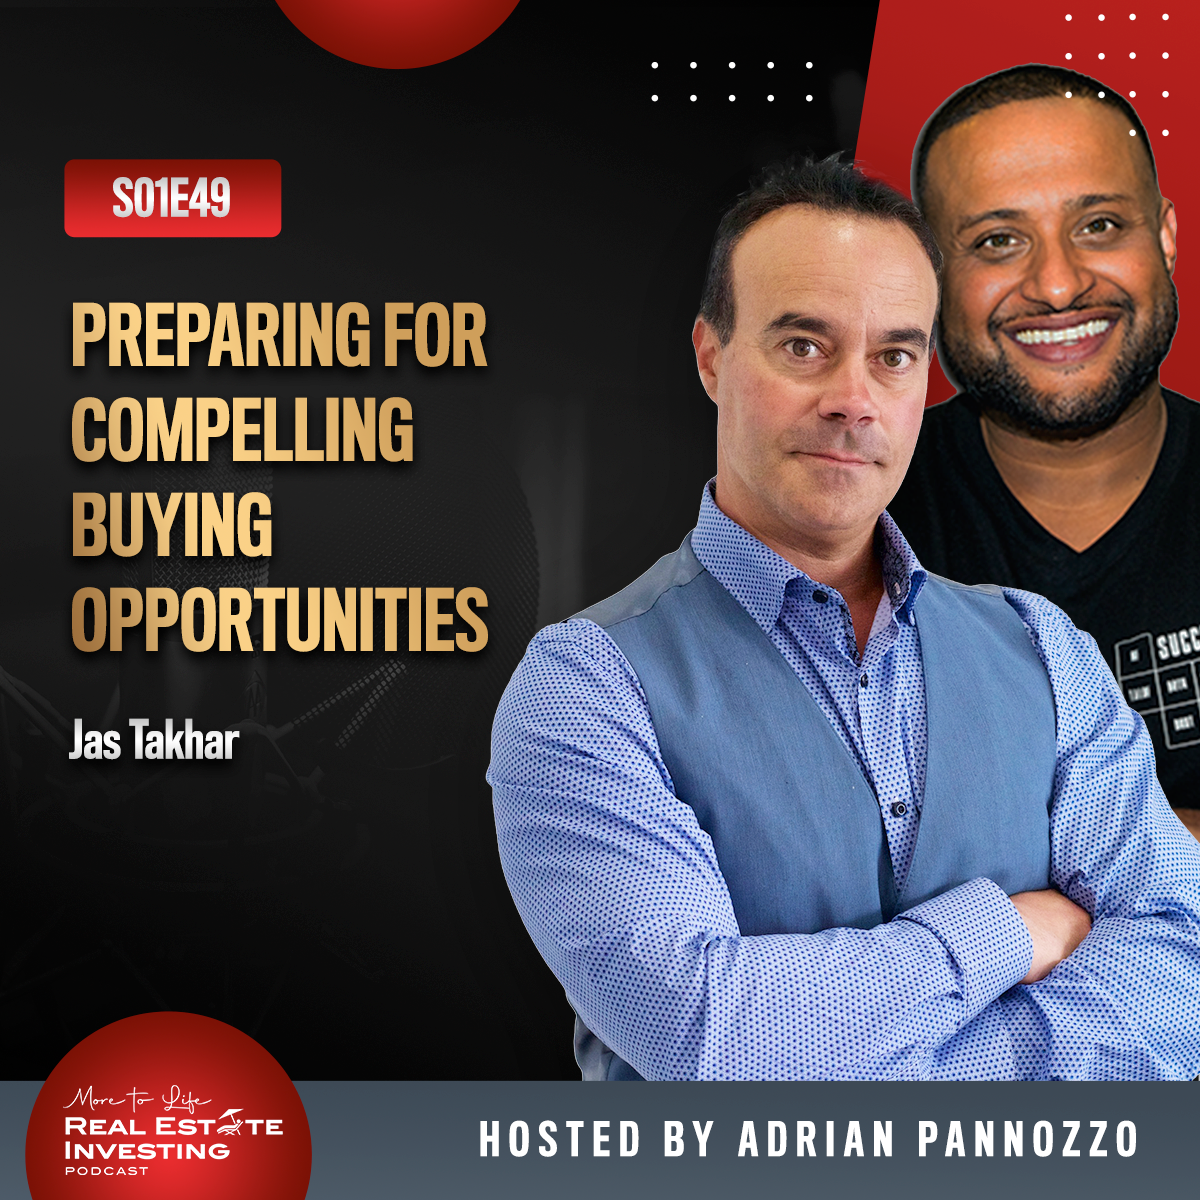 Preparing for Compelling Buying Opportunities with Jas Takhar